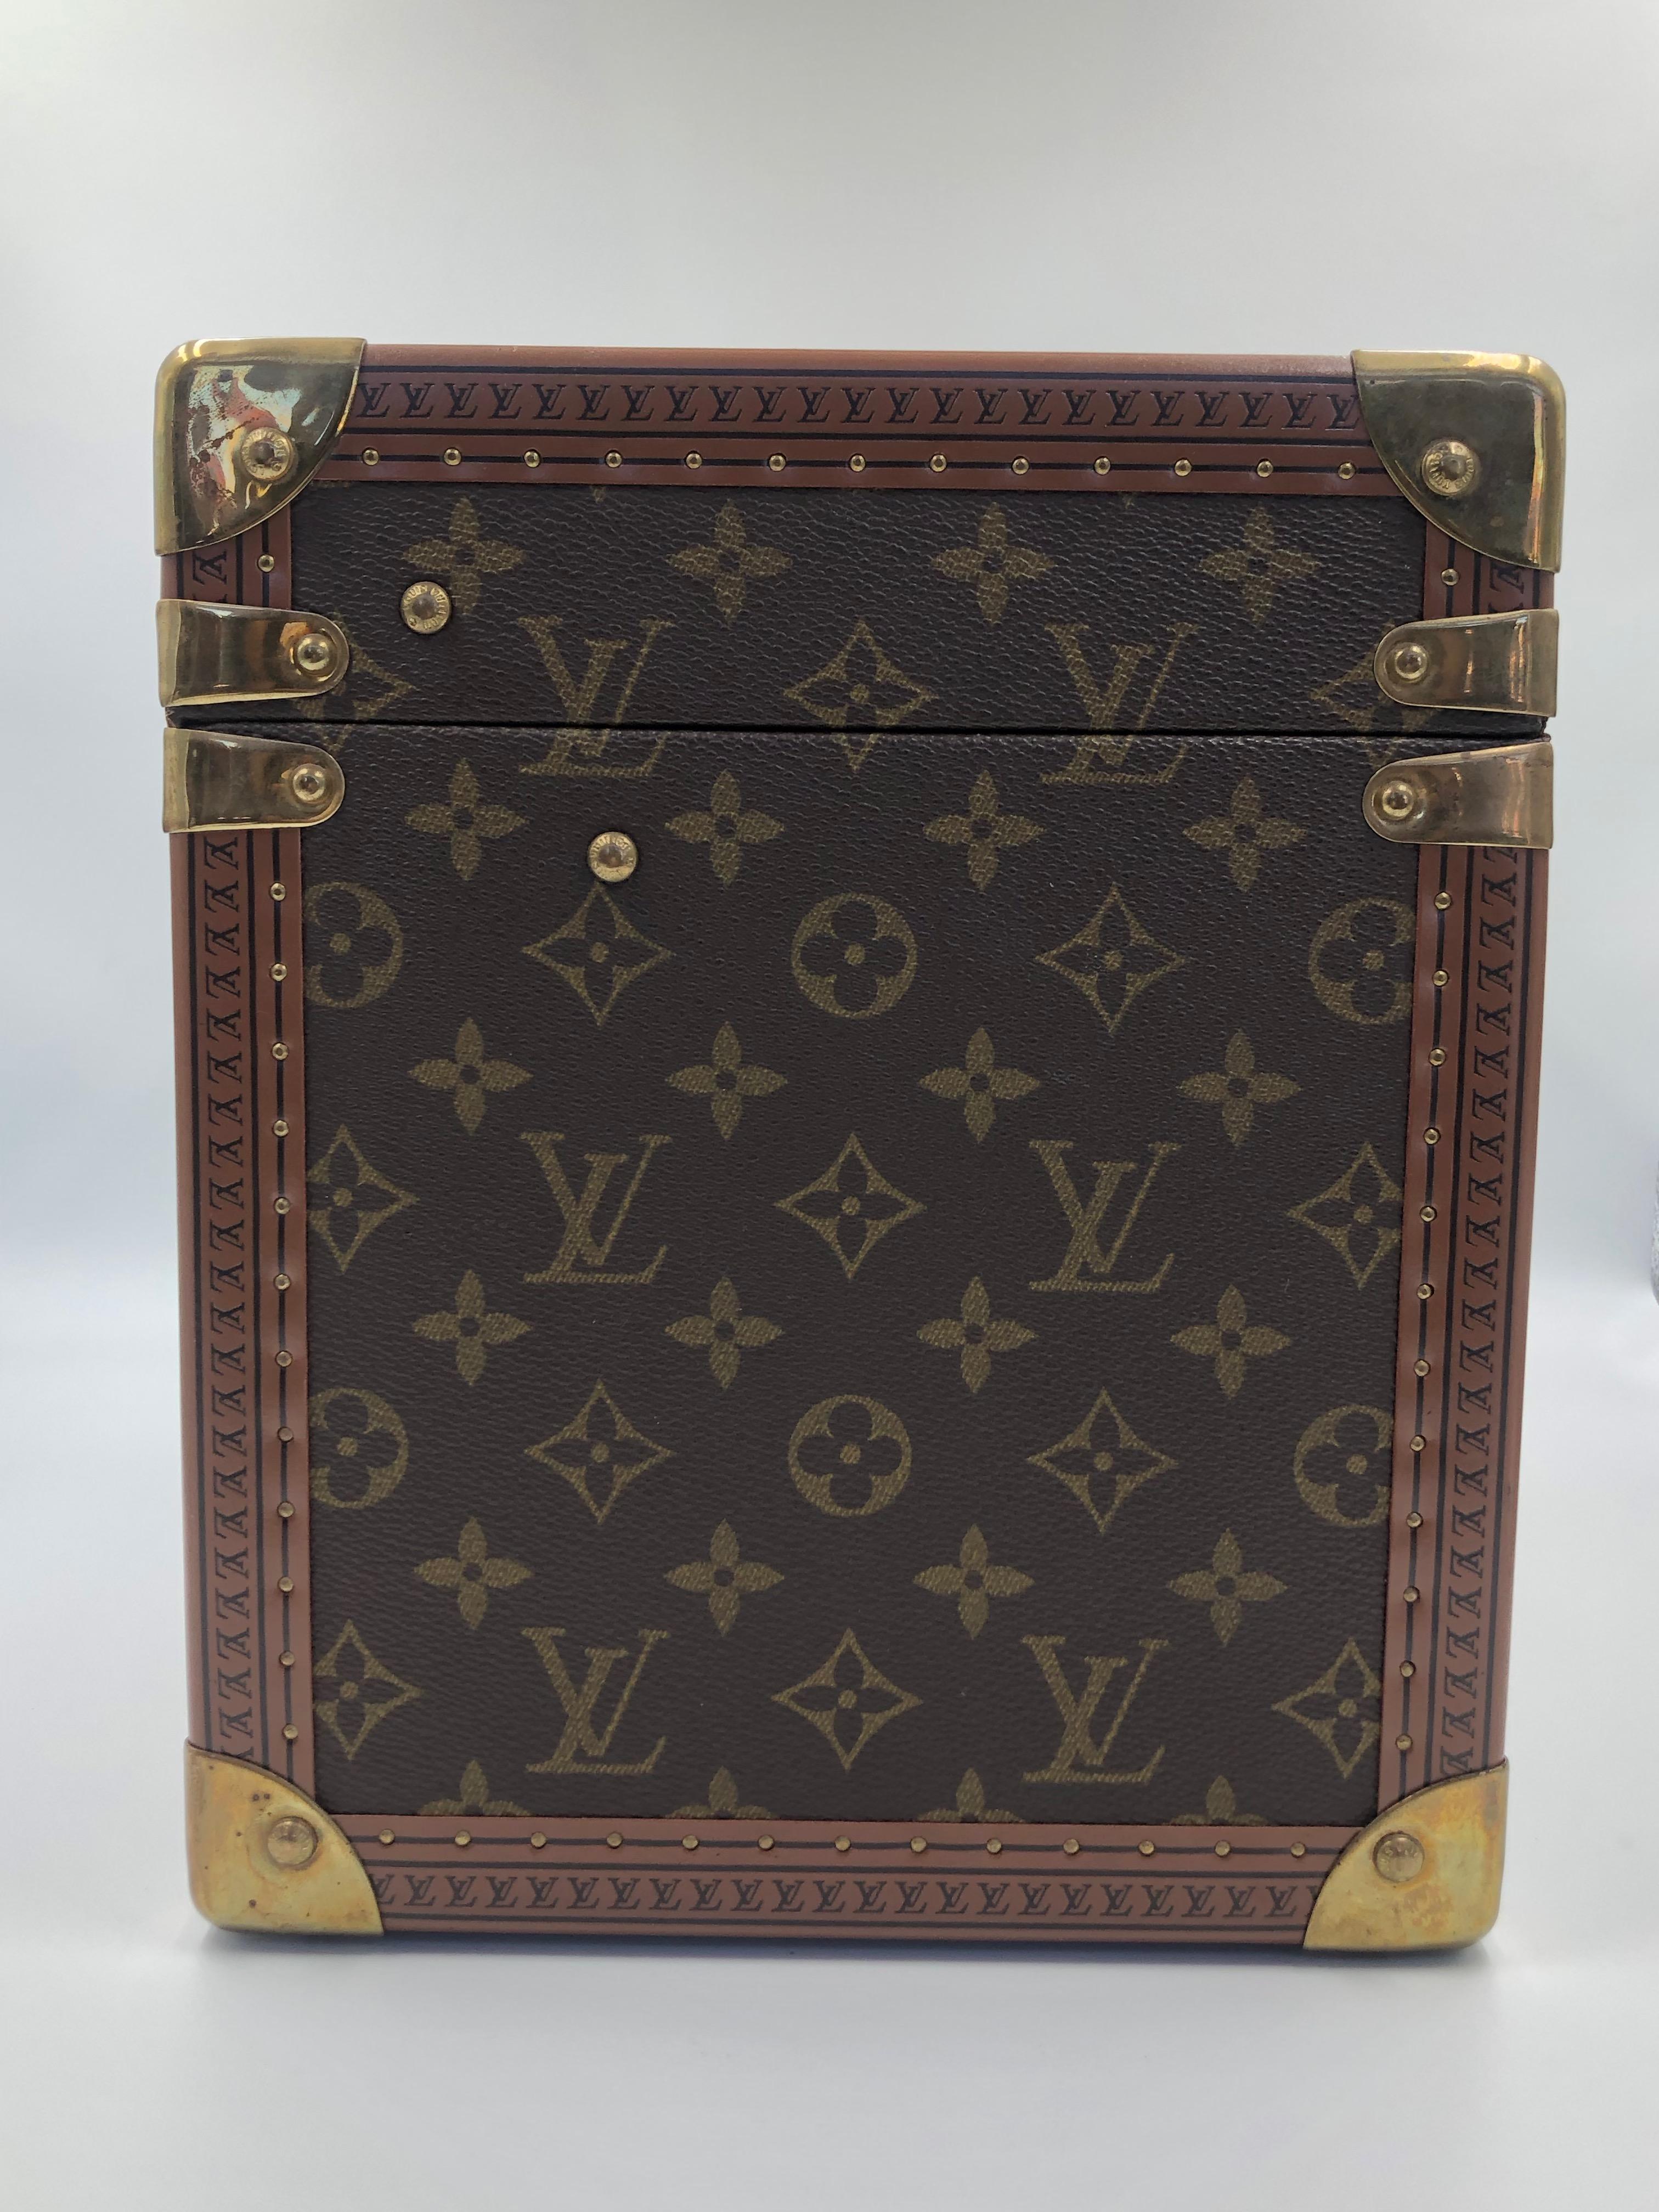 Louis Vuitton Pre-Owned monogram canvas train case featuring a top handle, multiple interior compartments, monogram print and gold-tone hardware. Removable small box with a mirror inside. Two Louis Vuitton stamped keys included with luggage tag.